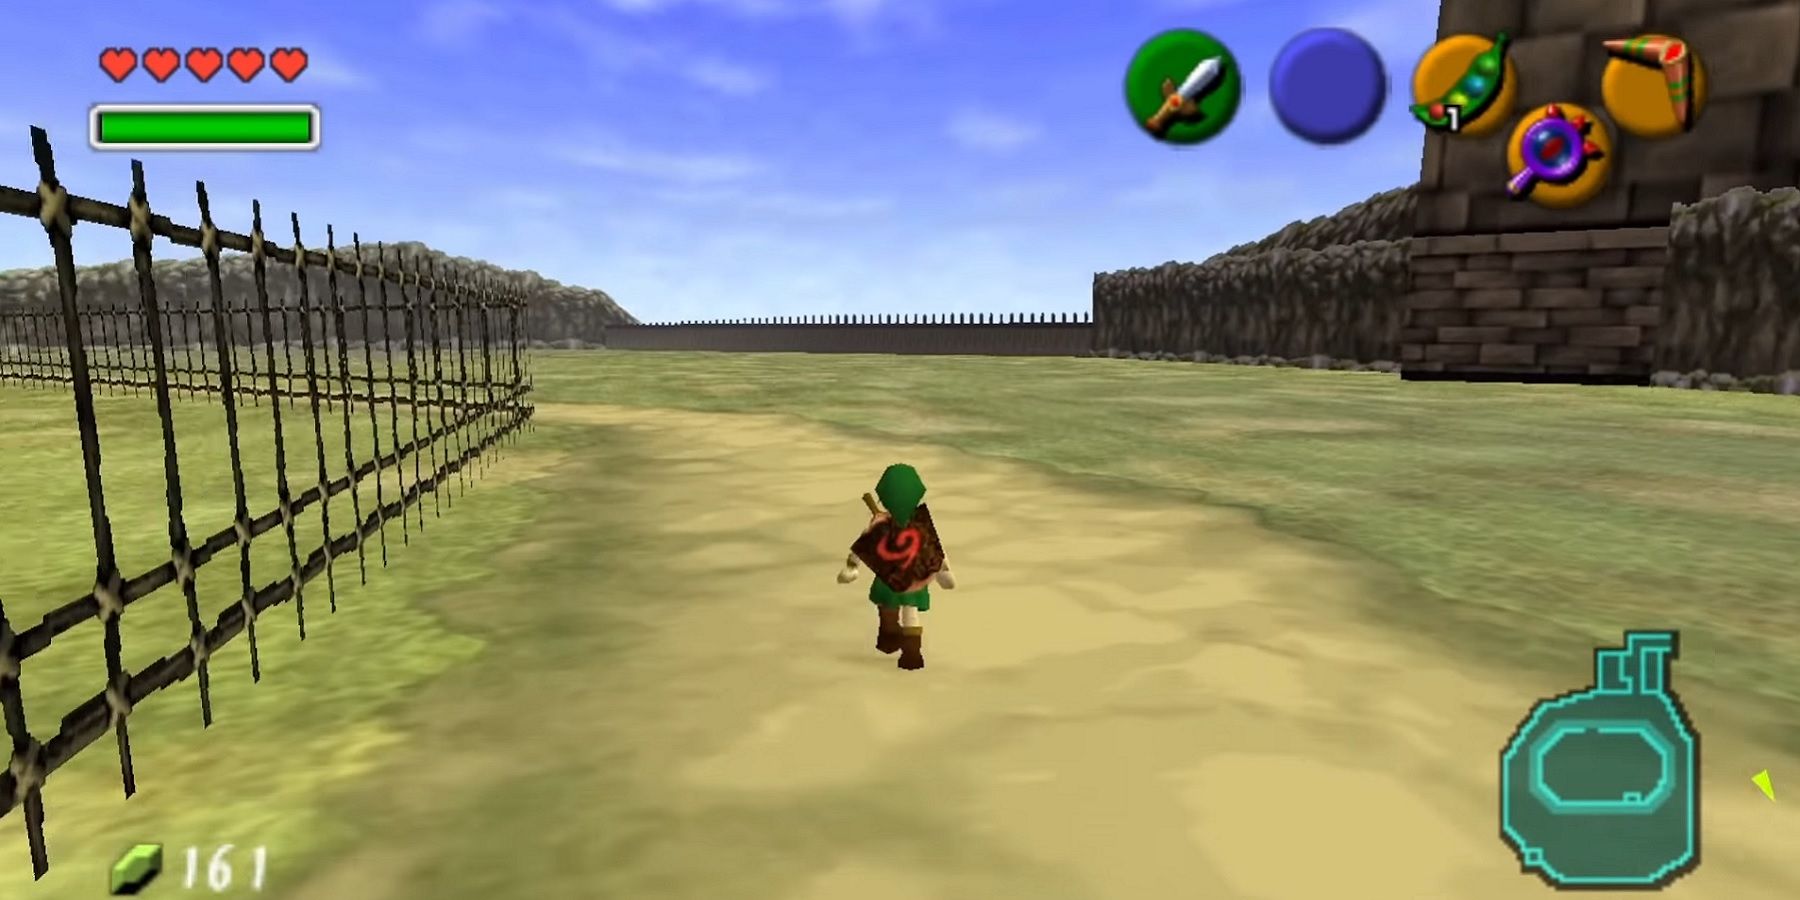 First Gameplay Footage of Ocarina of Time PC Port Emerges